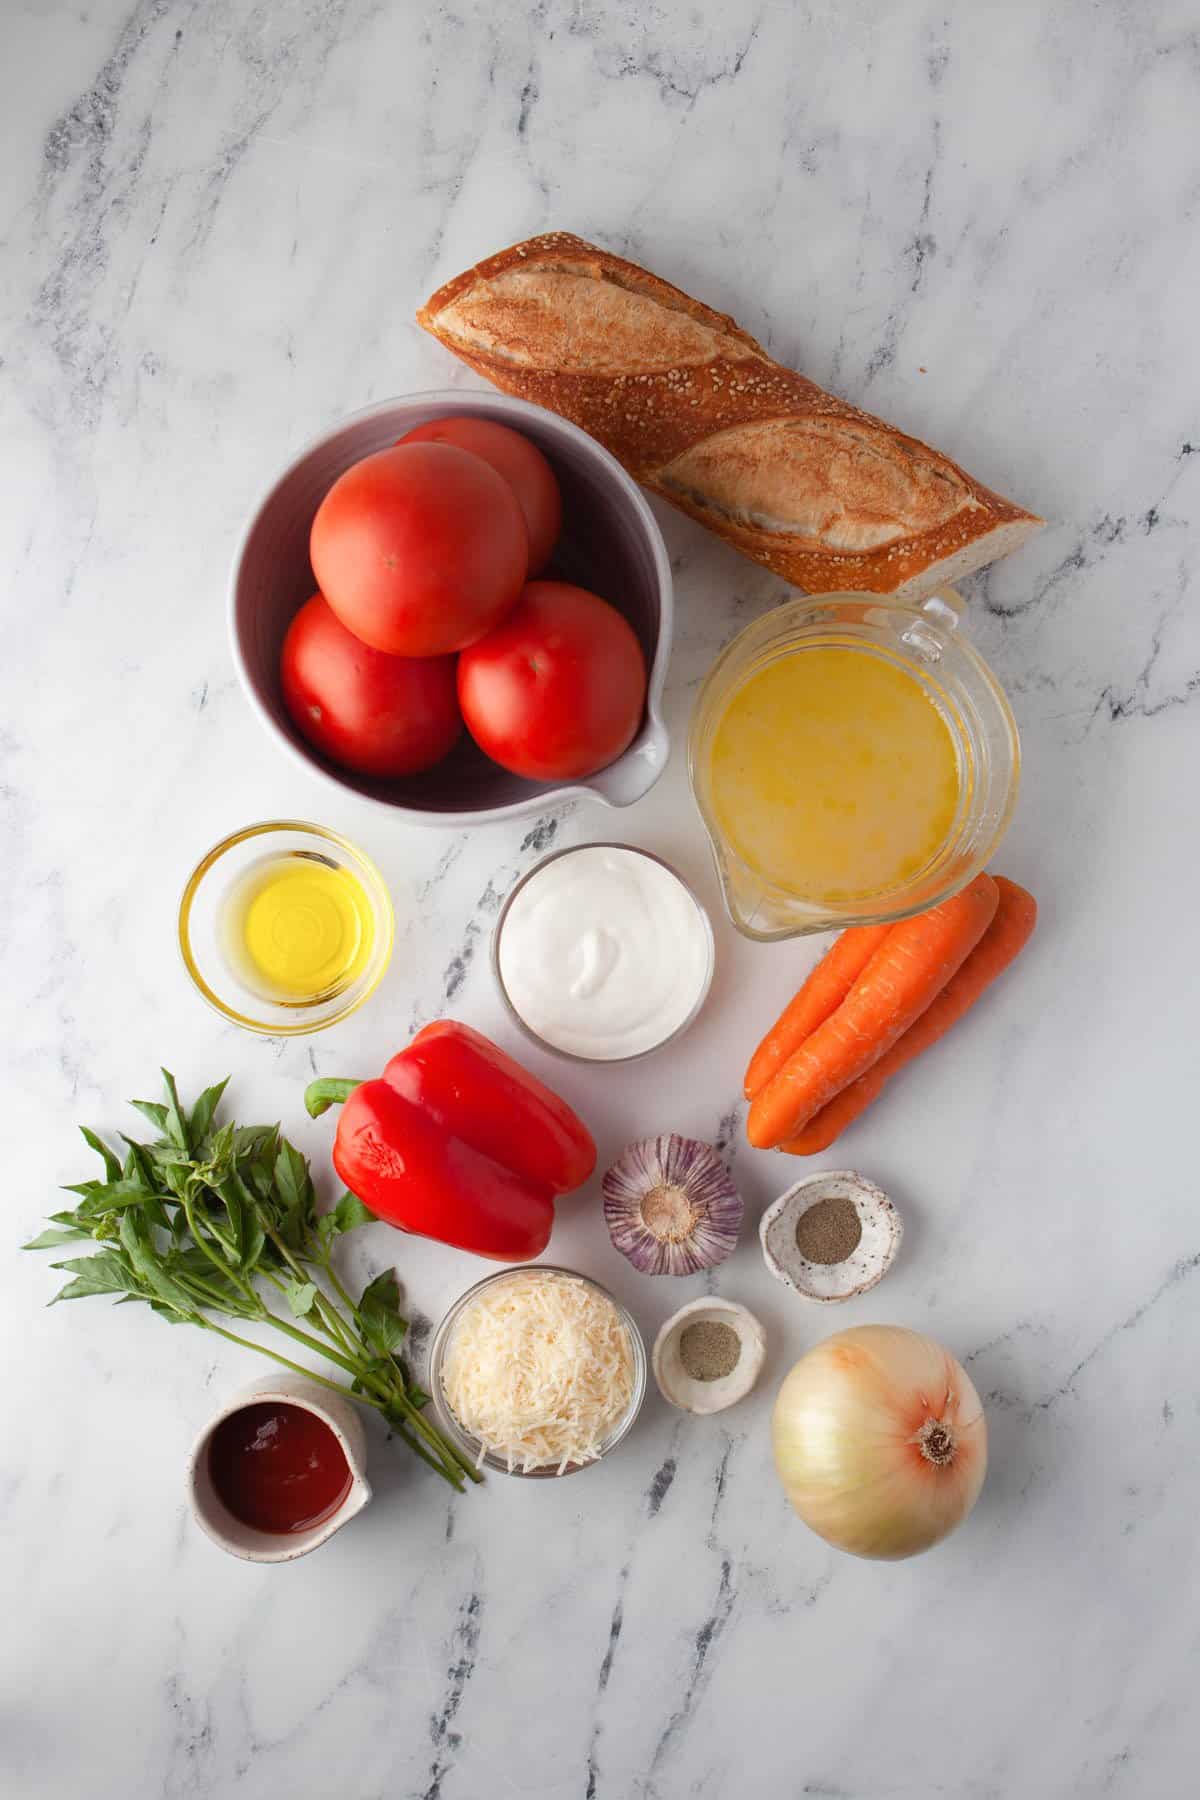 Ingredients for making Instant Pot tomato soup.